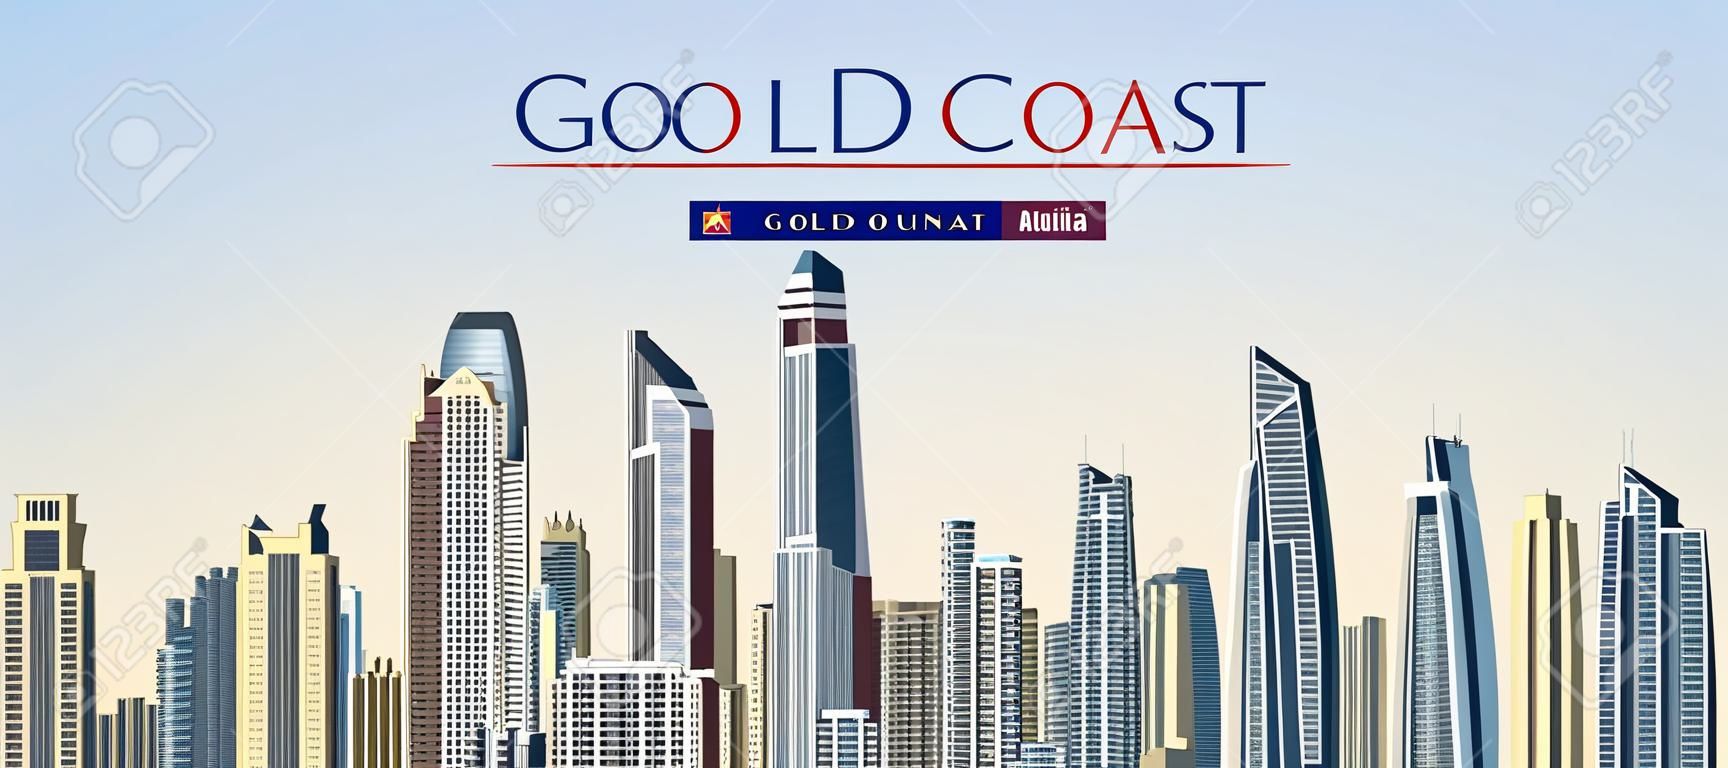 Vector illustration of the city of Gold Coast.